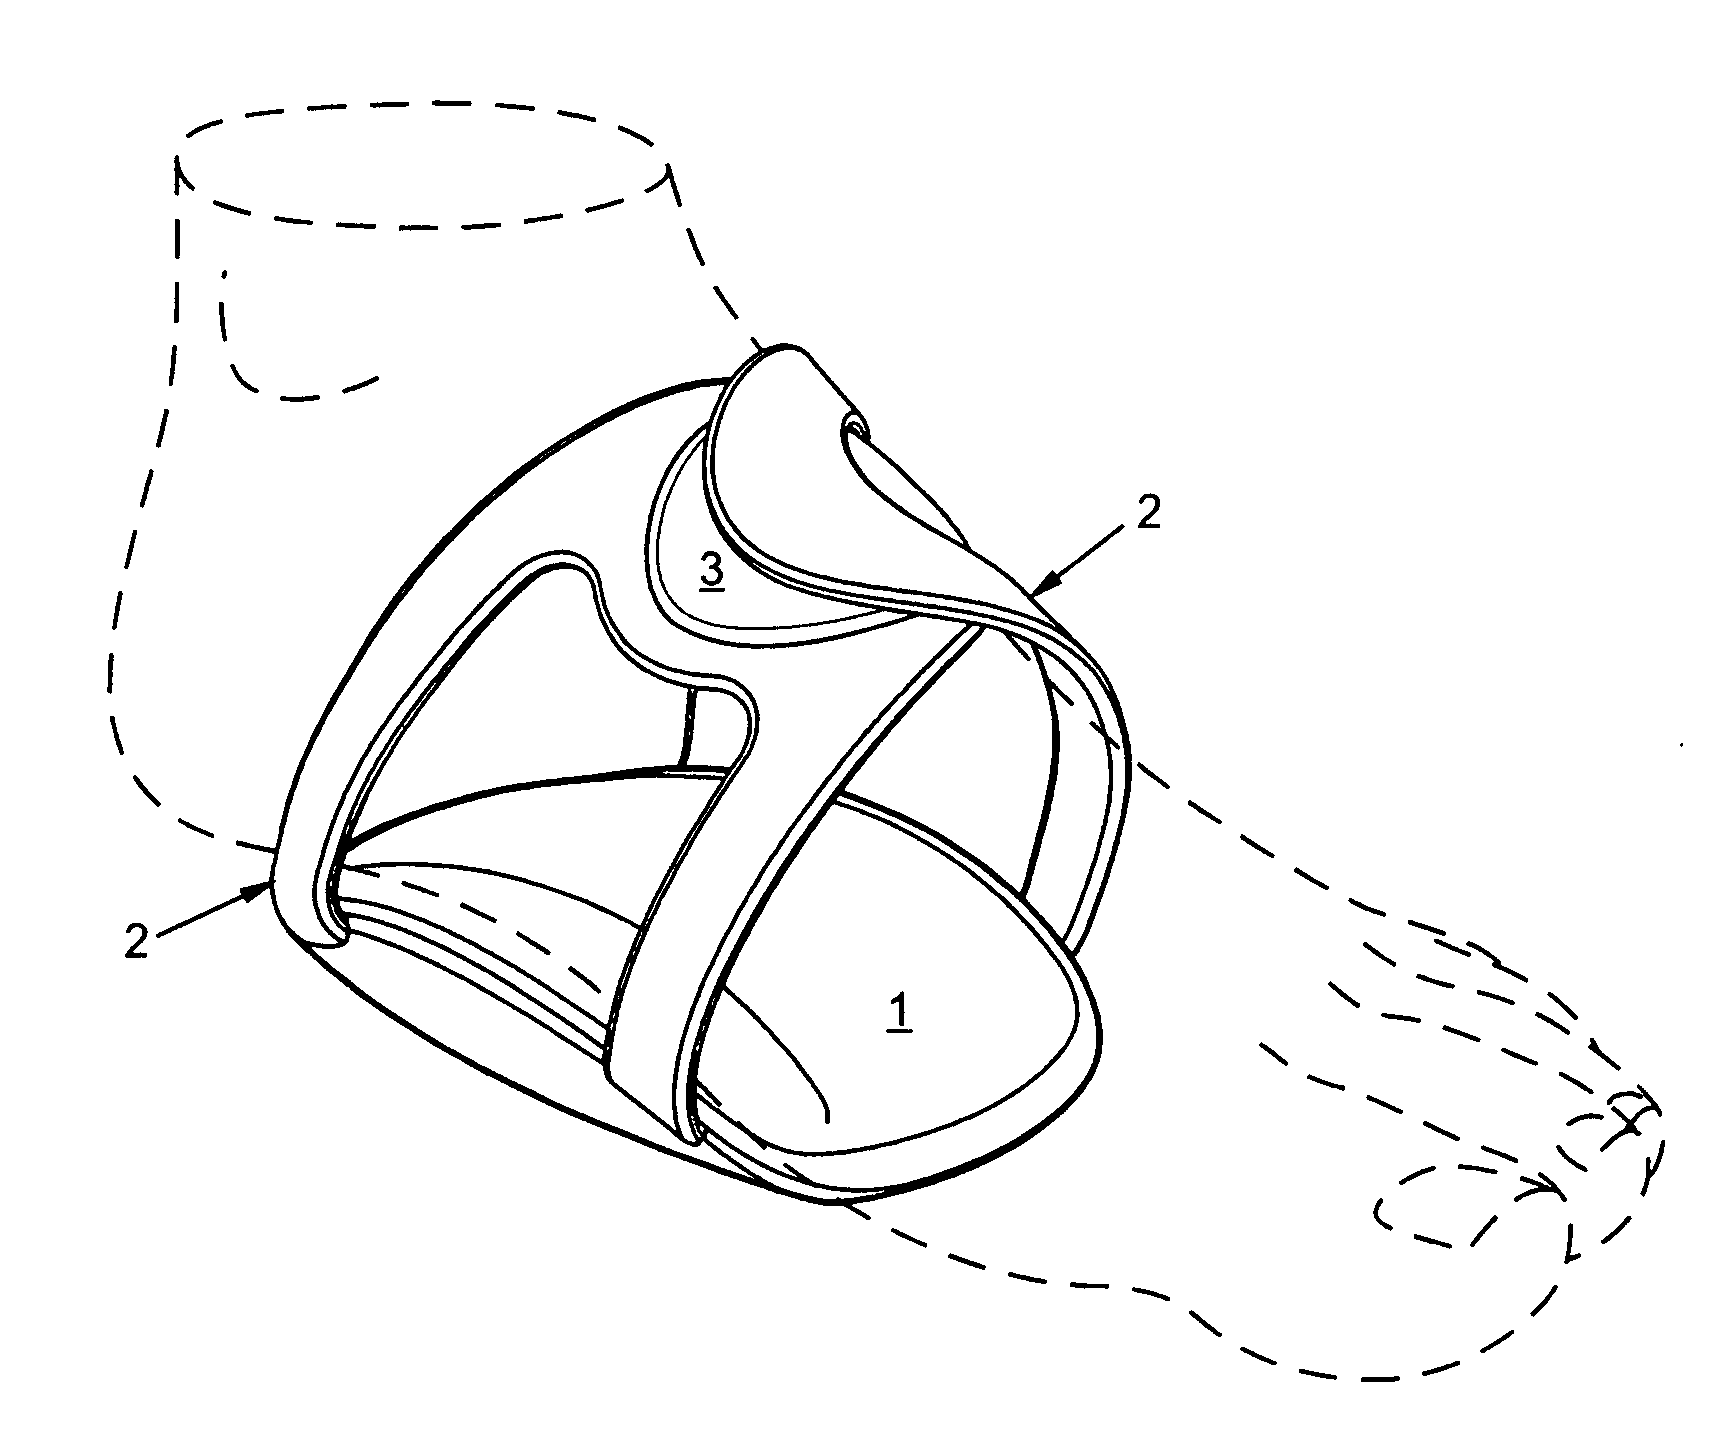 Arch support independent of footwear